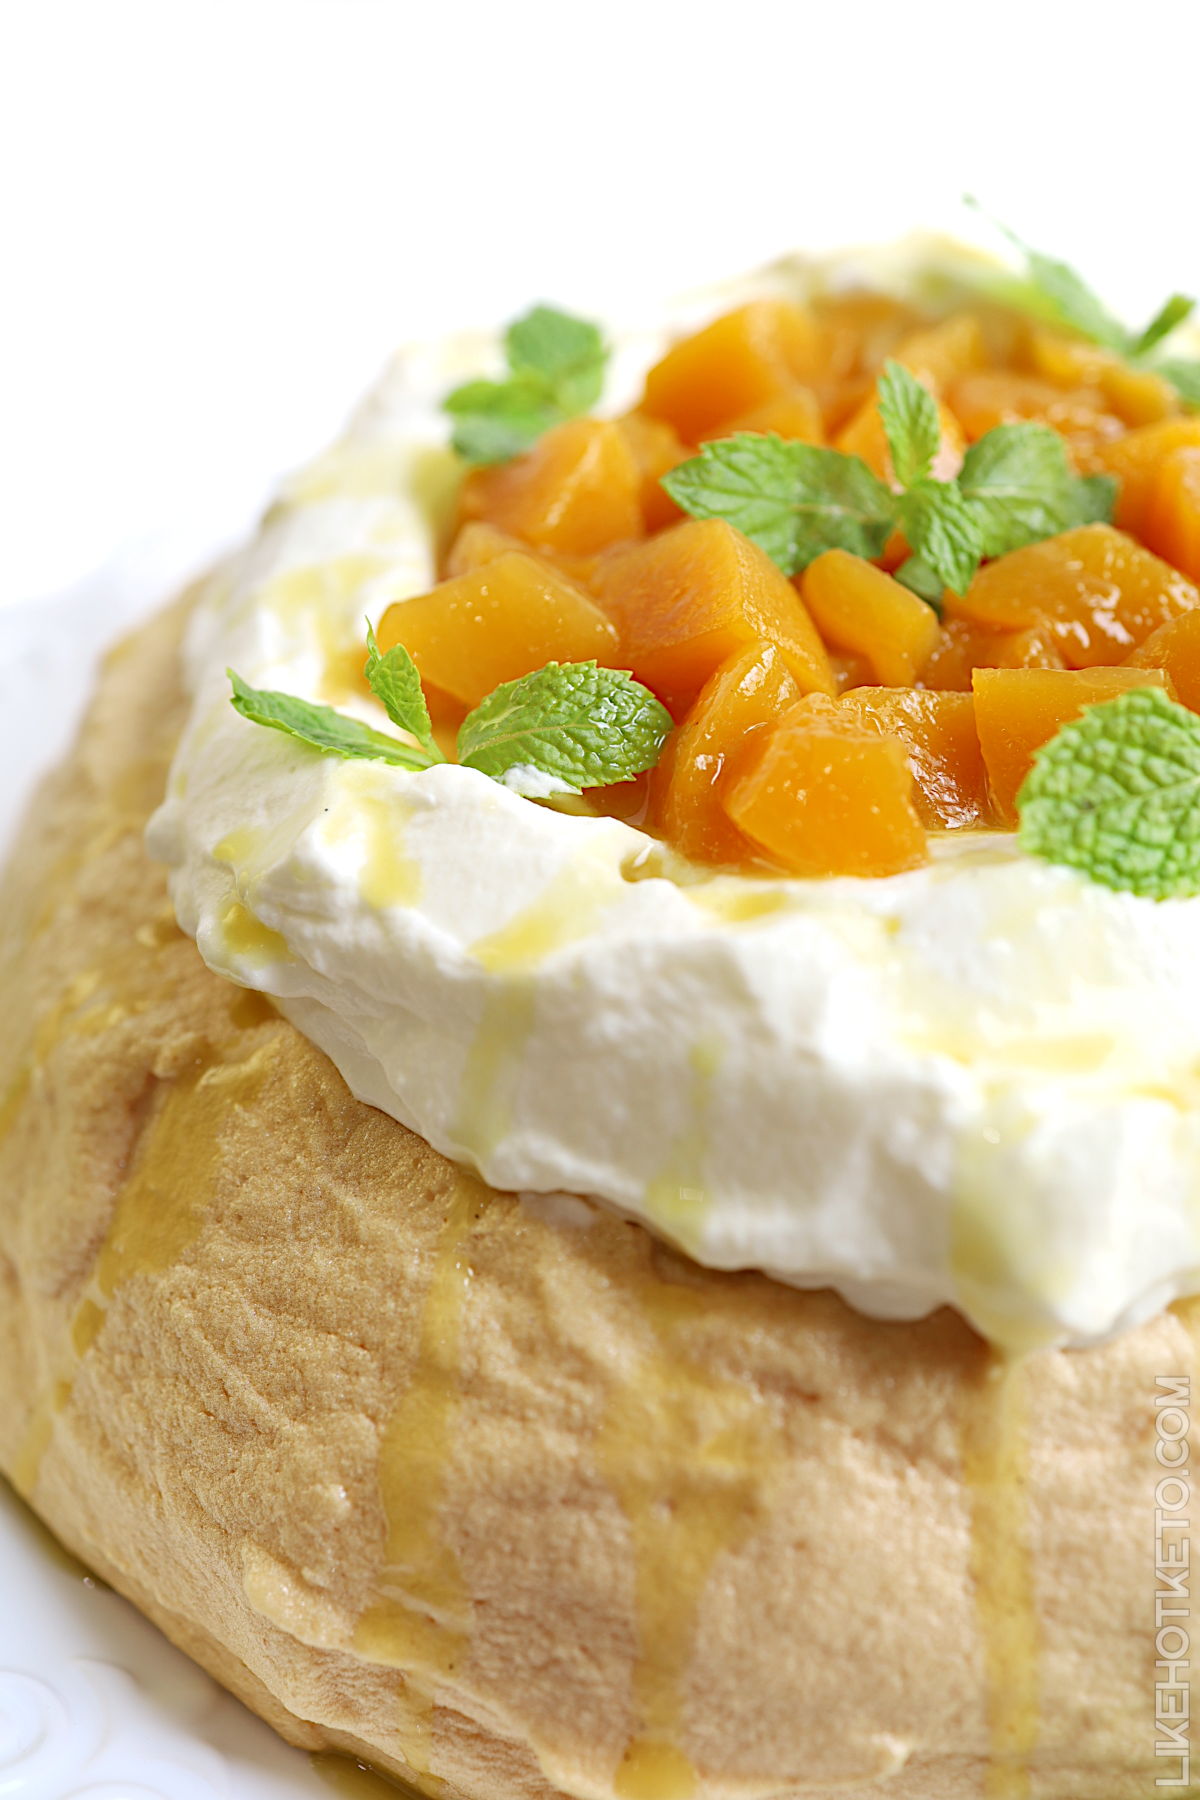 Low-carb pavlova topped with summer peaches and cream and garnished with mint leaves.